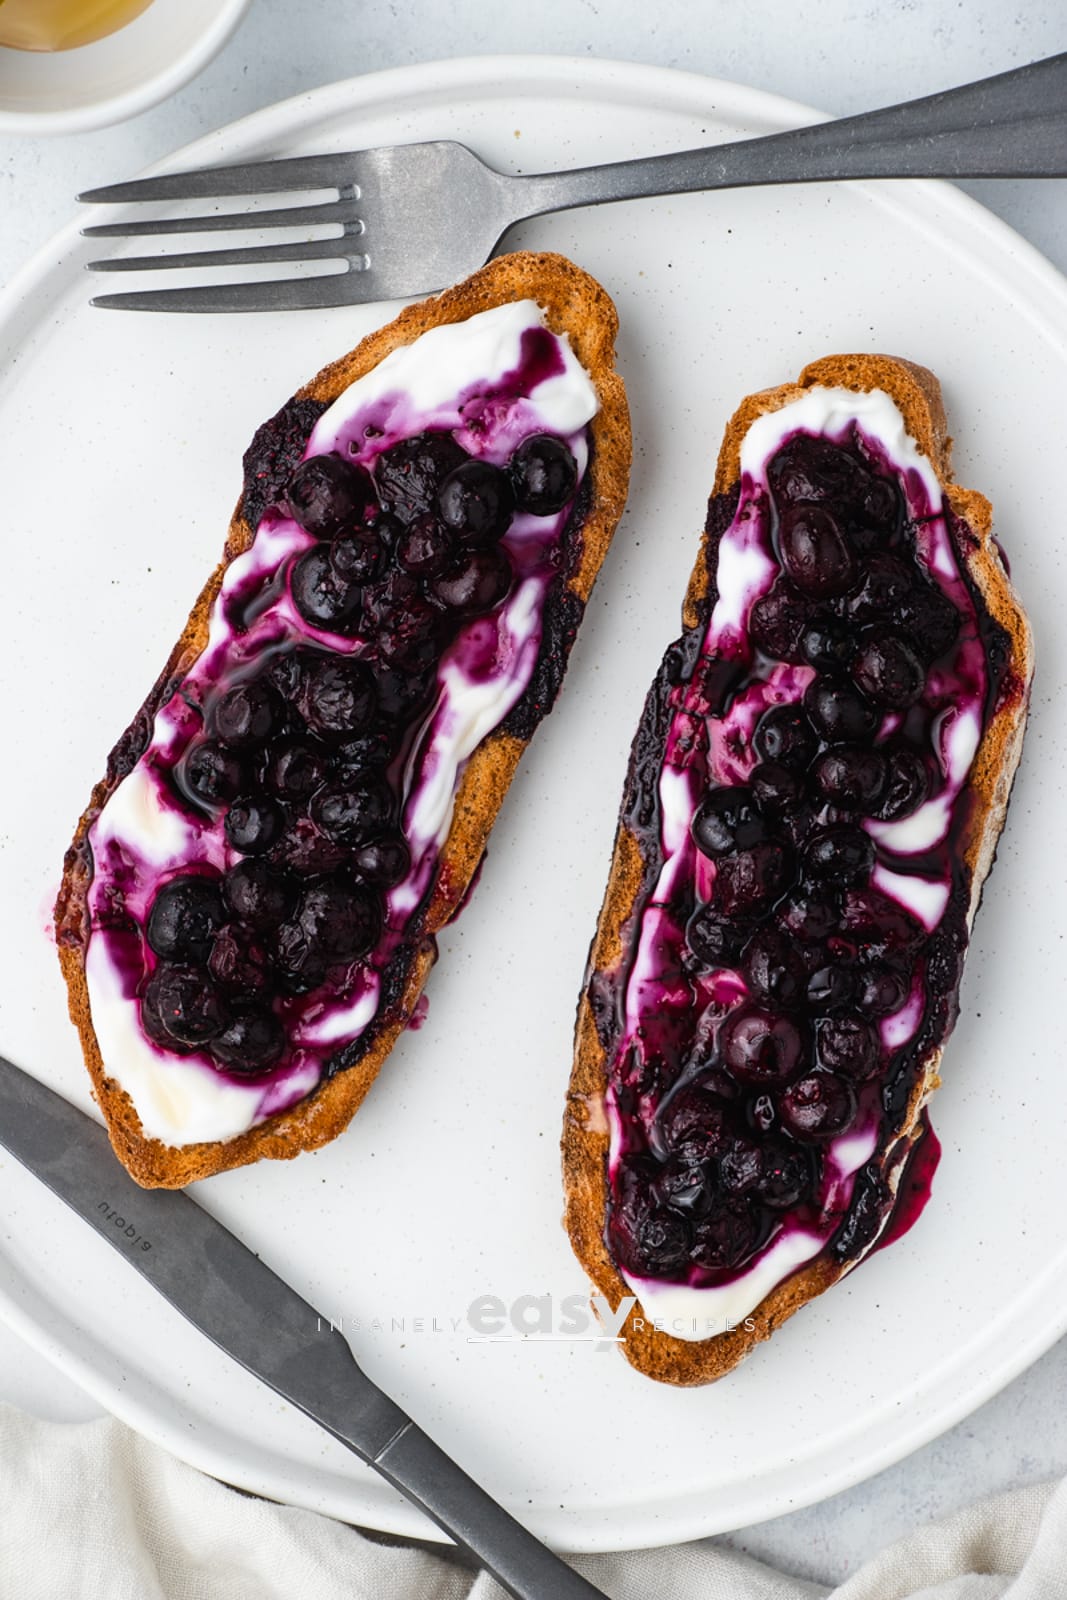 top view photo of 2 slices of blueberry toast on a white plate with a fork and small bowl of honey above it, and a butter knife and white kitchen towel below it